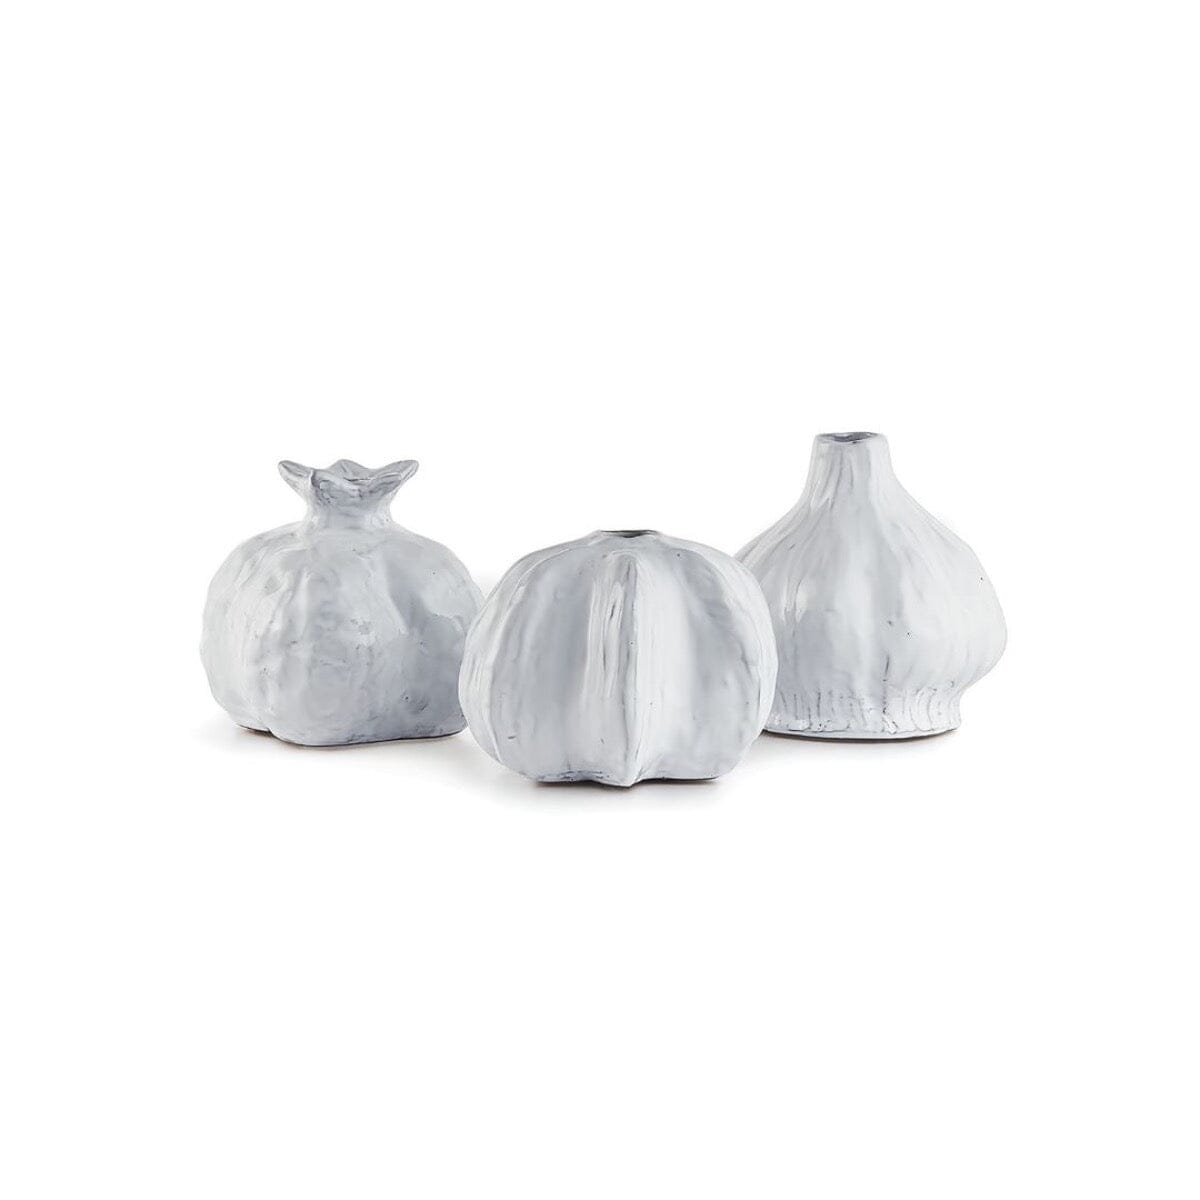 White Ceramic Gourds - Set of 3 Objects & Accents 